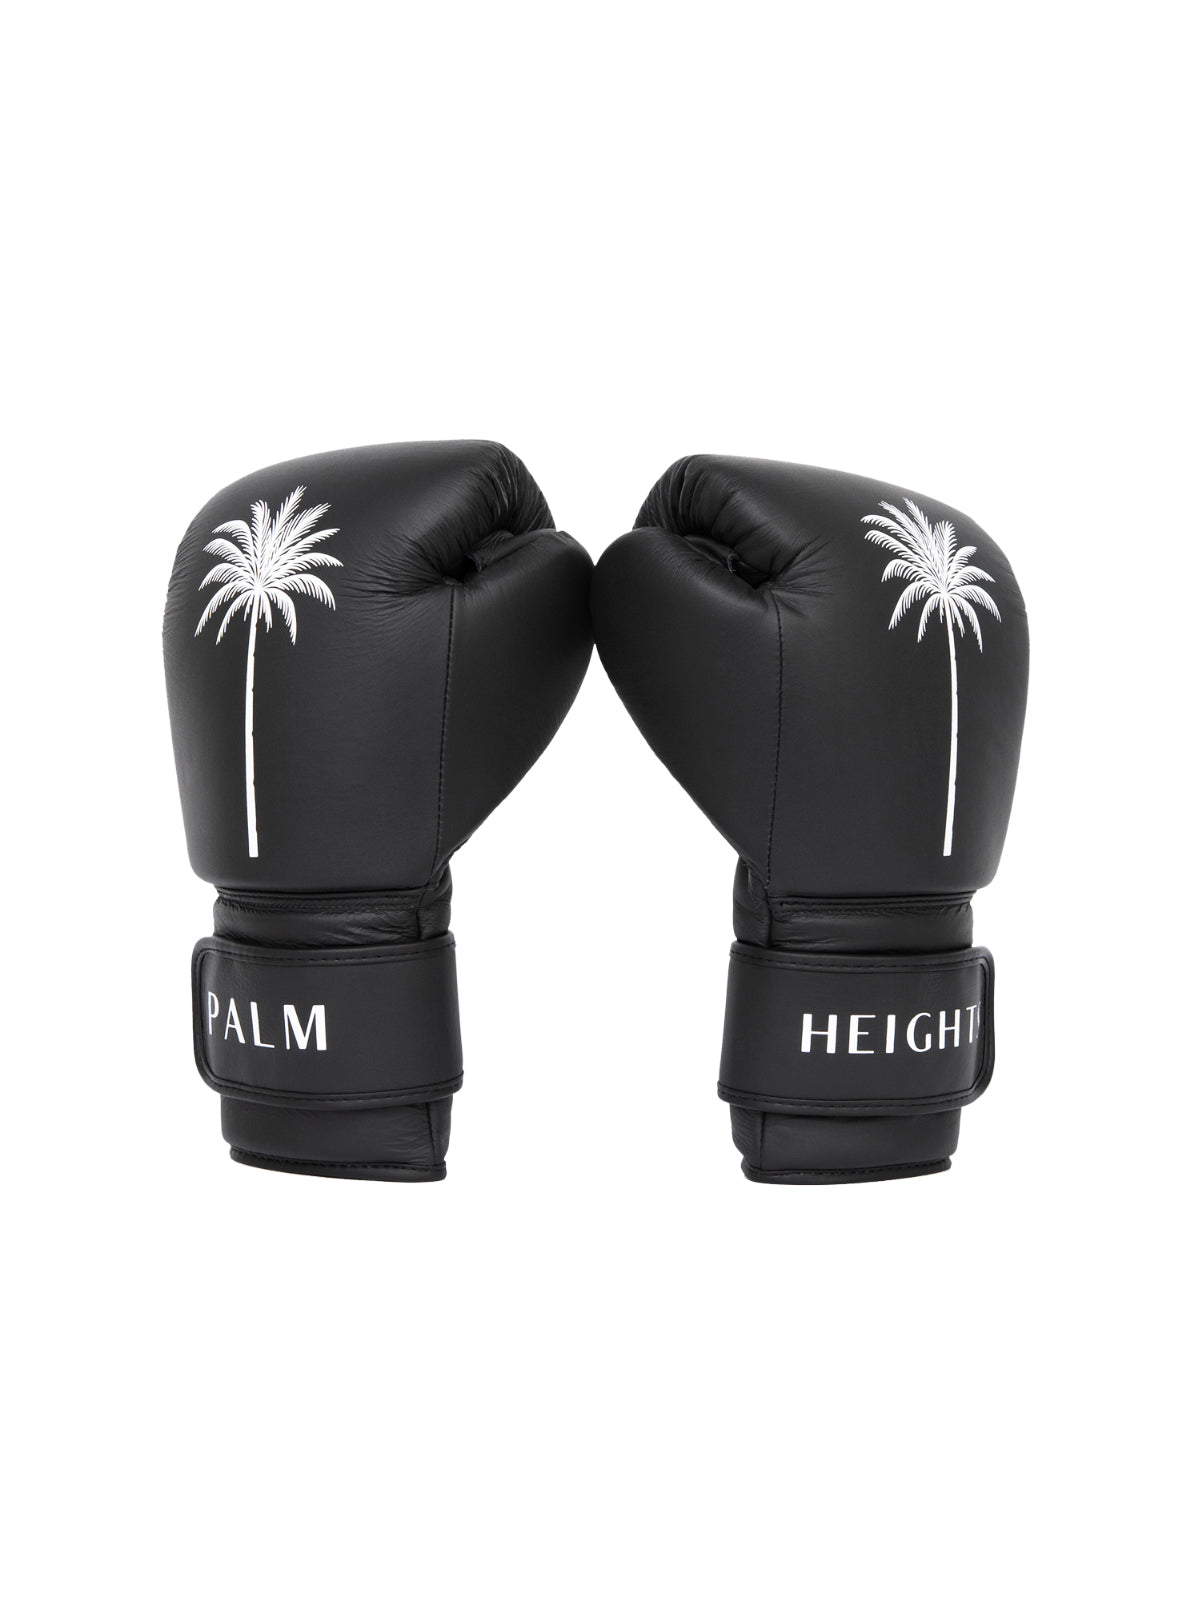 Palm Heights Signature Boxing Gloves